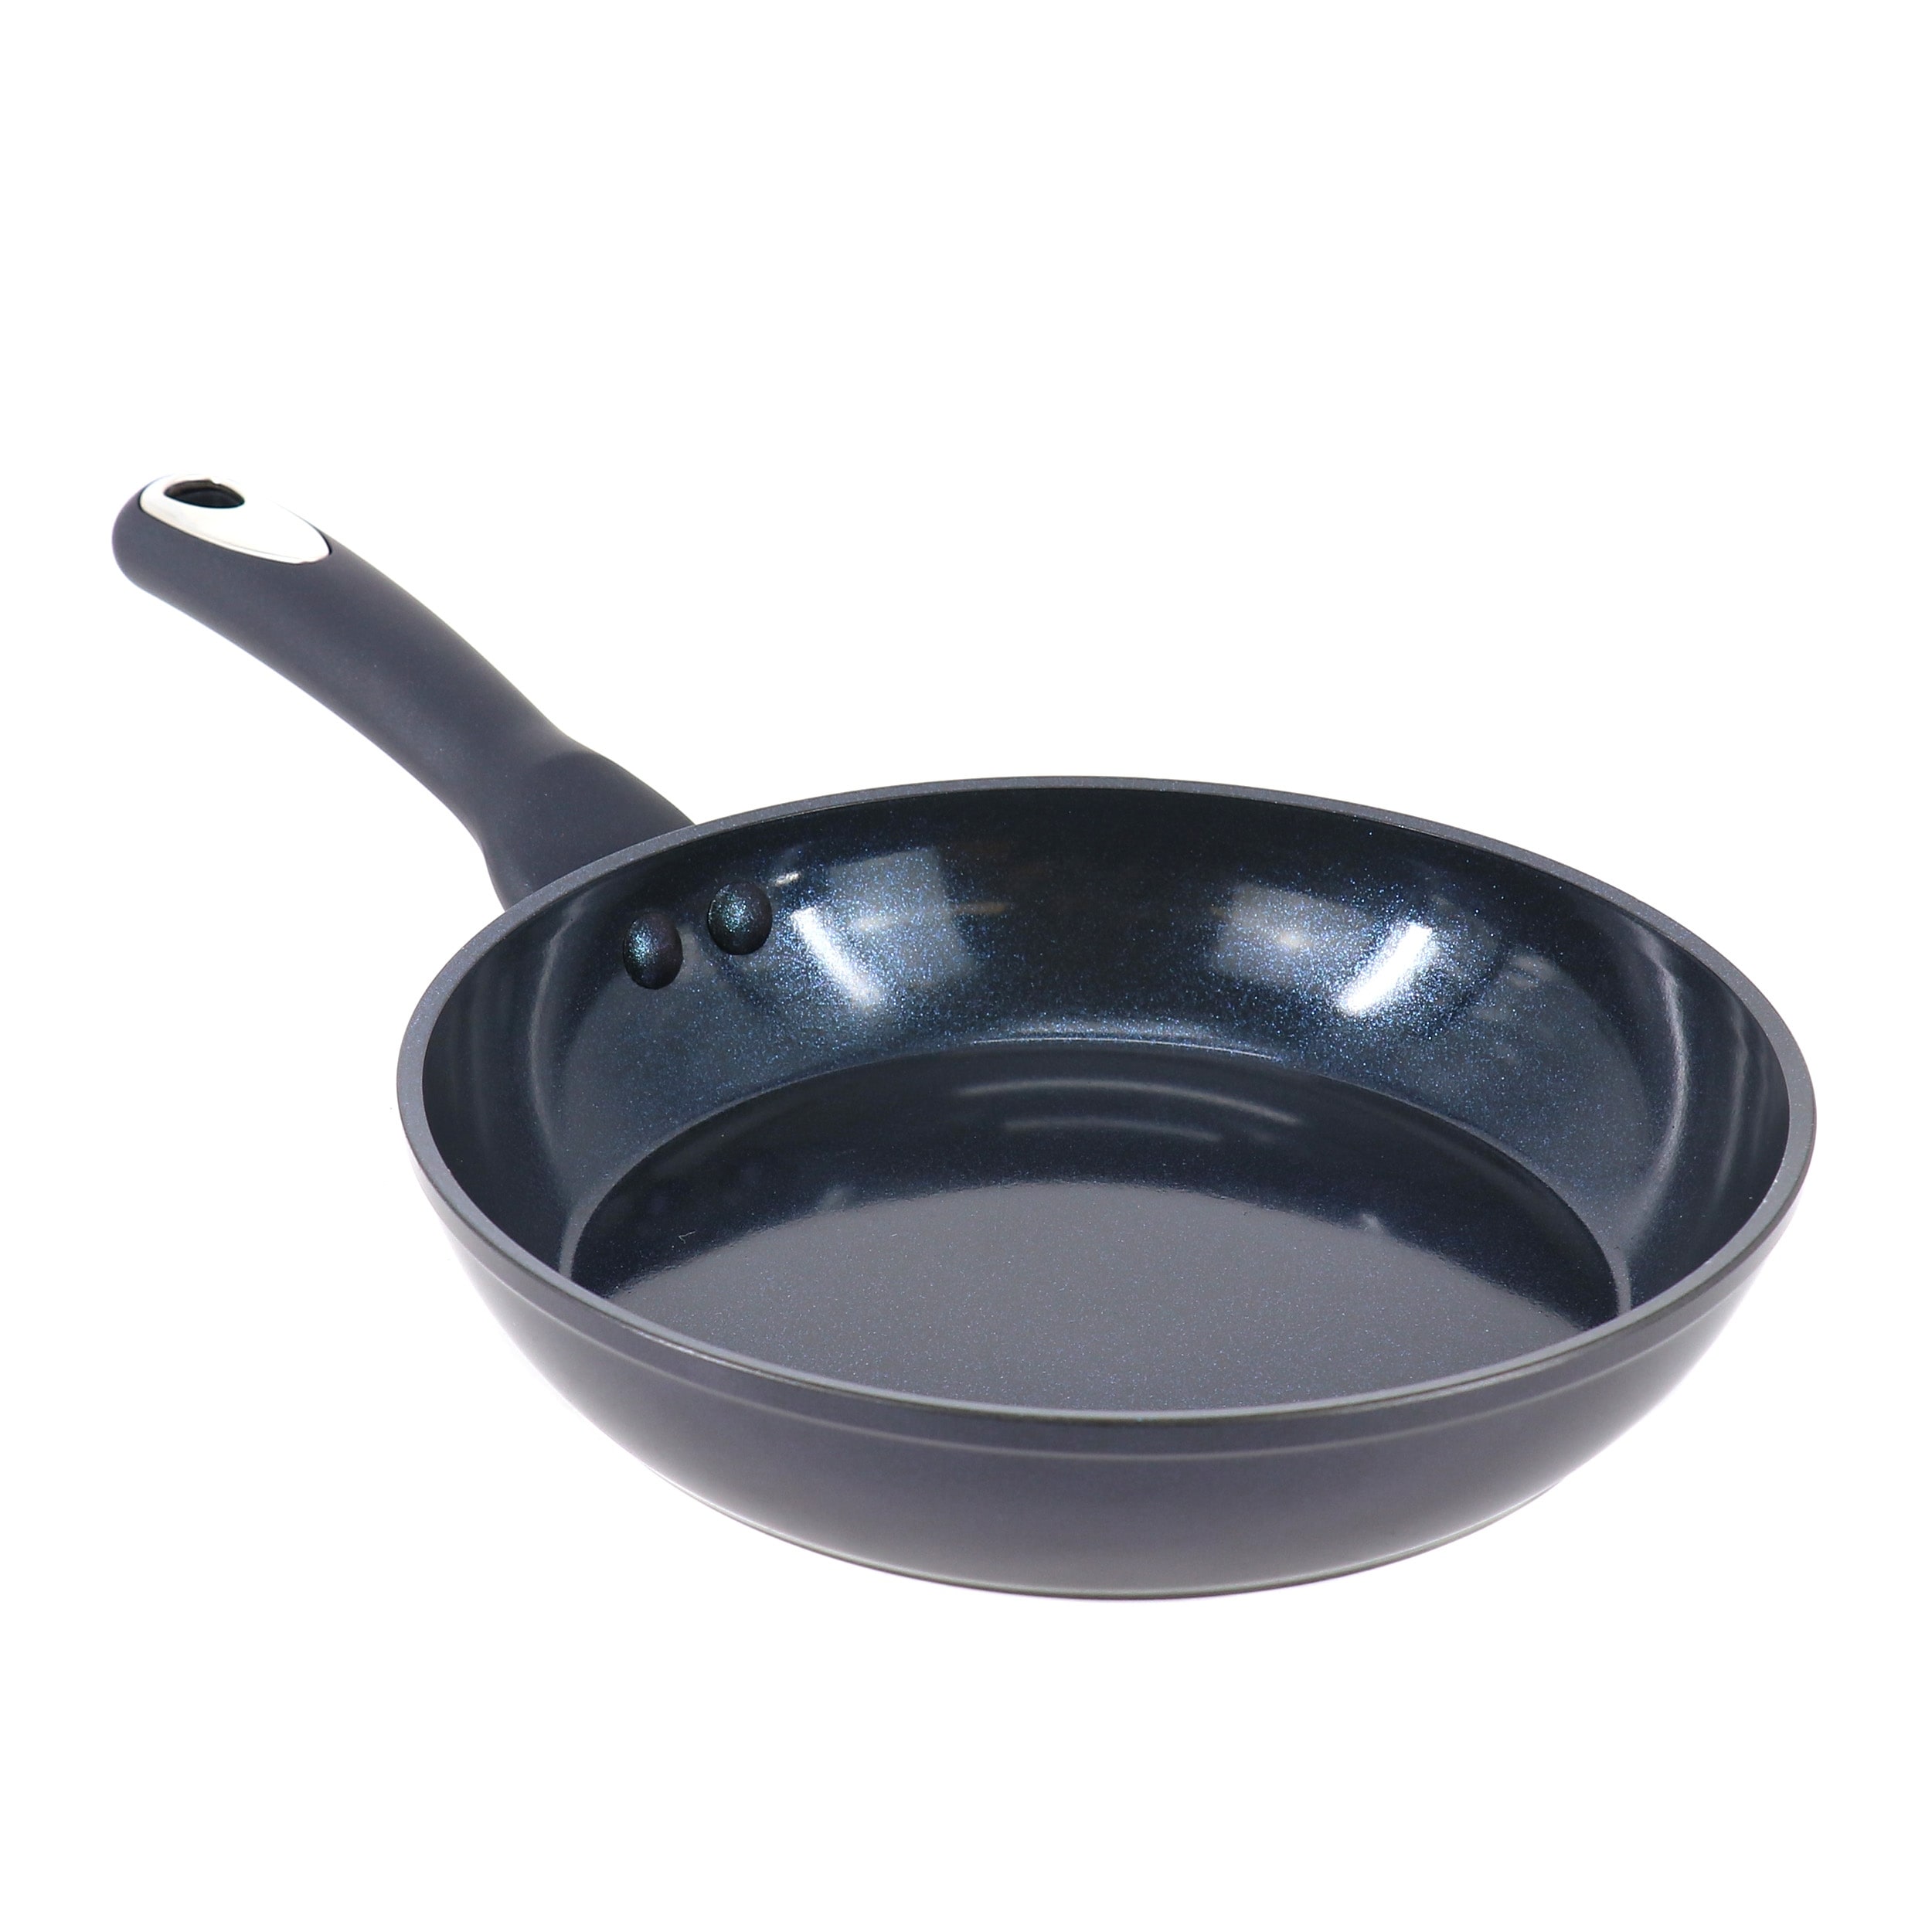 https://ak1.ostkcdn.com/images/products/is/images/direct/29fa2c7980ca540d5f674f8053735d6f72a32622/8-Inch-Ceramic-Nonstick-Aluminum-Frying-Pan-in-Dark-Blue.jpg